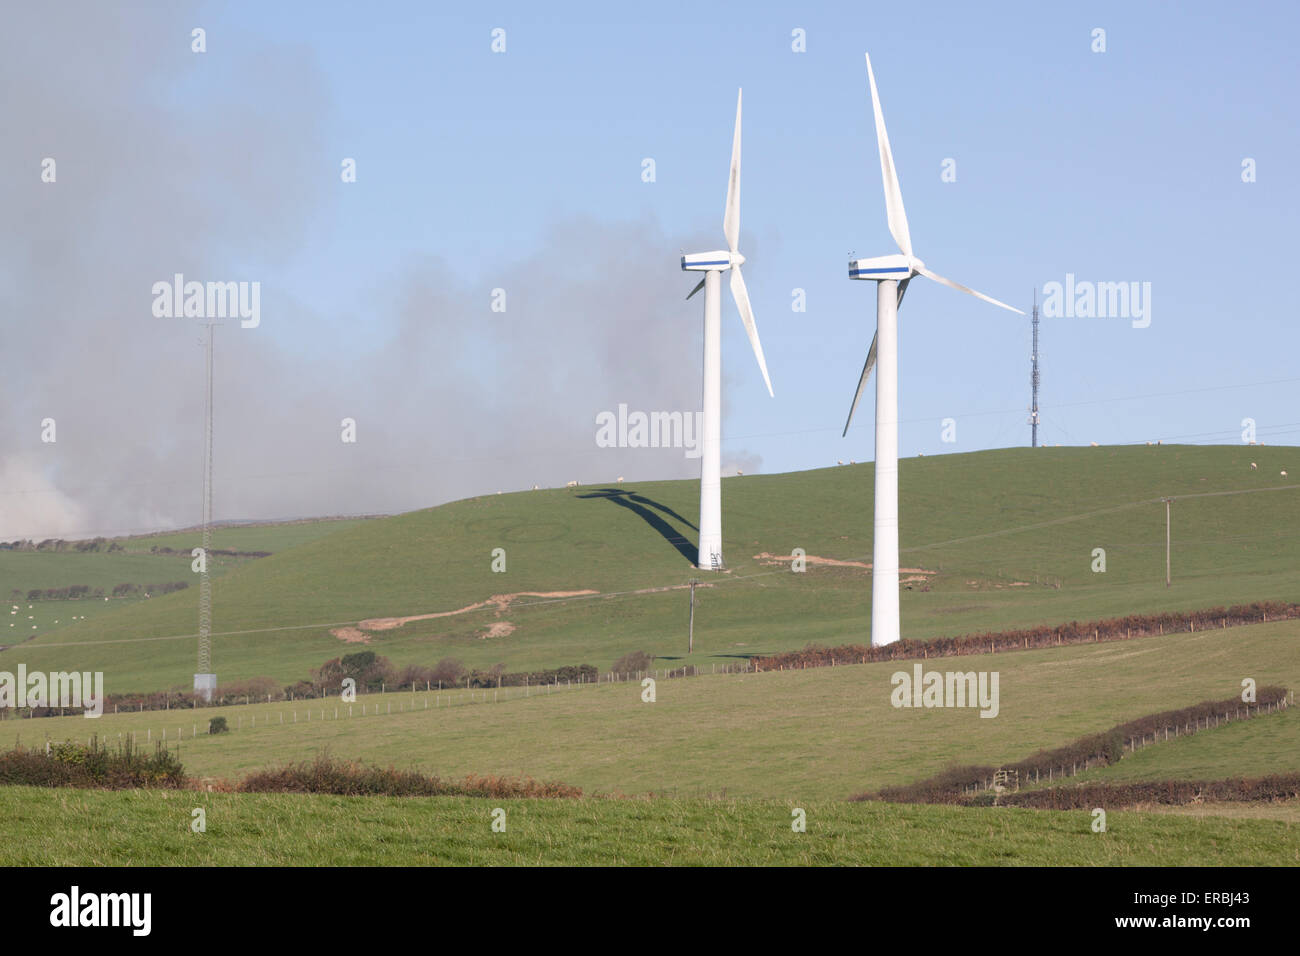 Two wind turbines in a field with smoke in the background Stock Photo